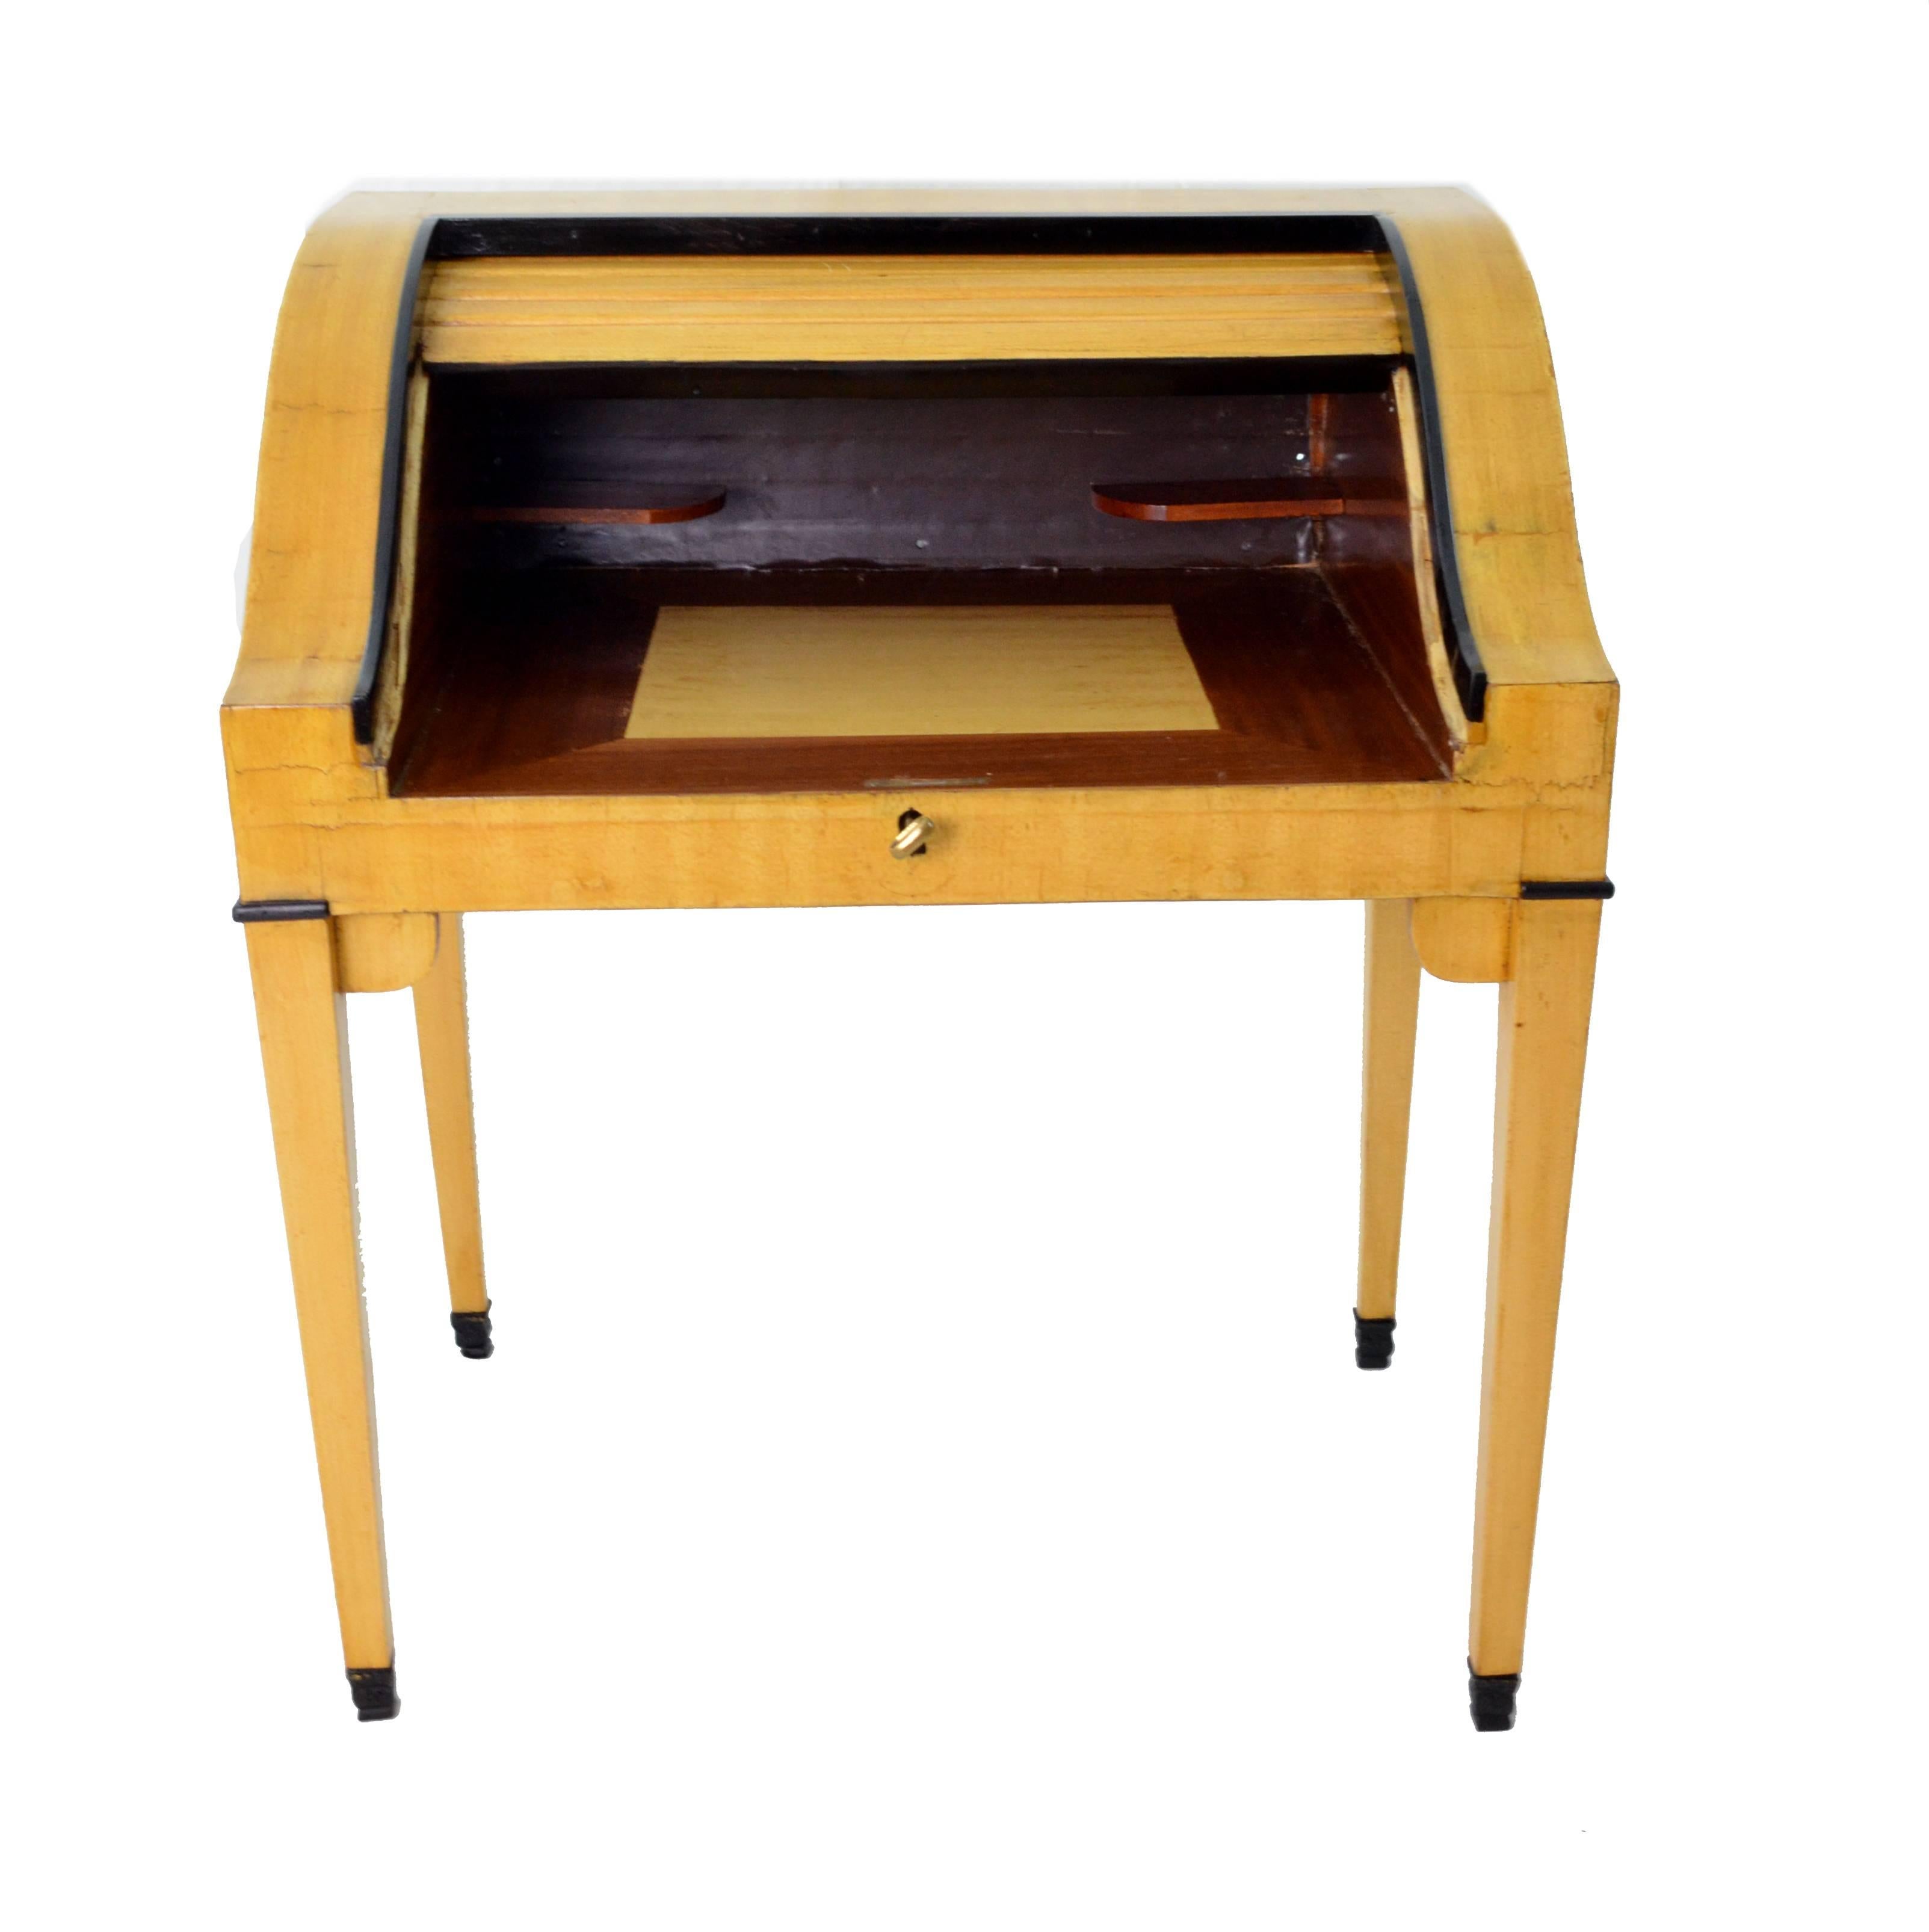 Small and functional desk from French Art Deco period 1930s with shutter door.
The structure is in maple and the inner part is in mahogany with black ebonized details.
We have done a conservative restoration.
The small size allows you to set this